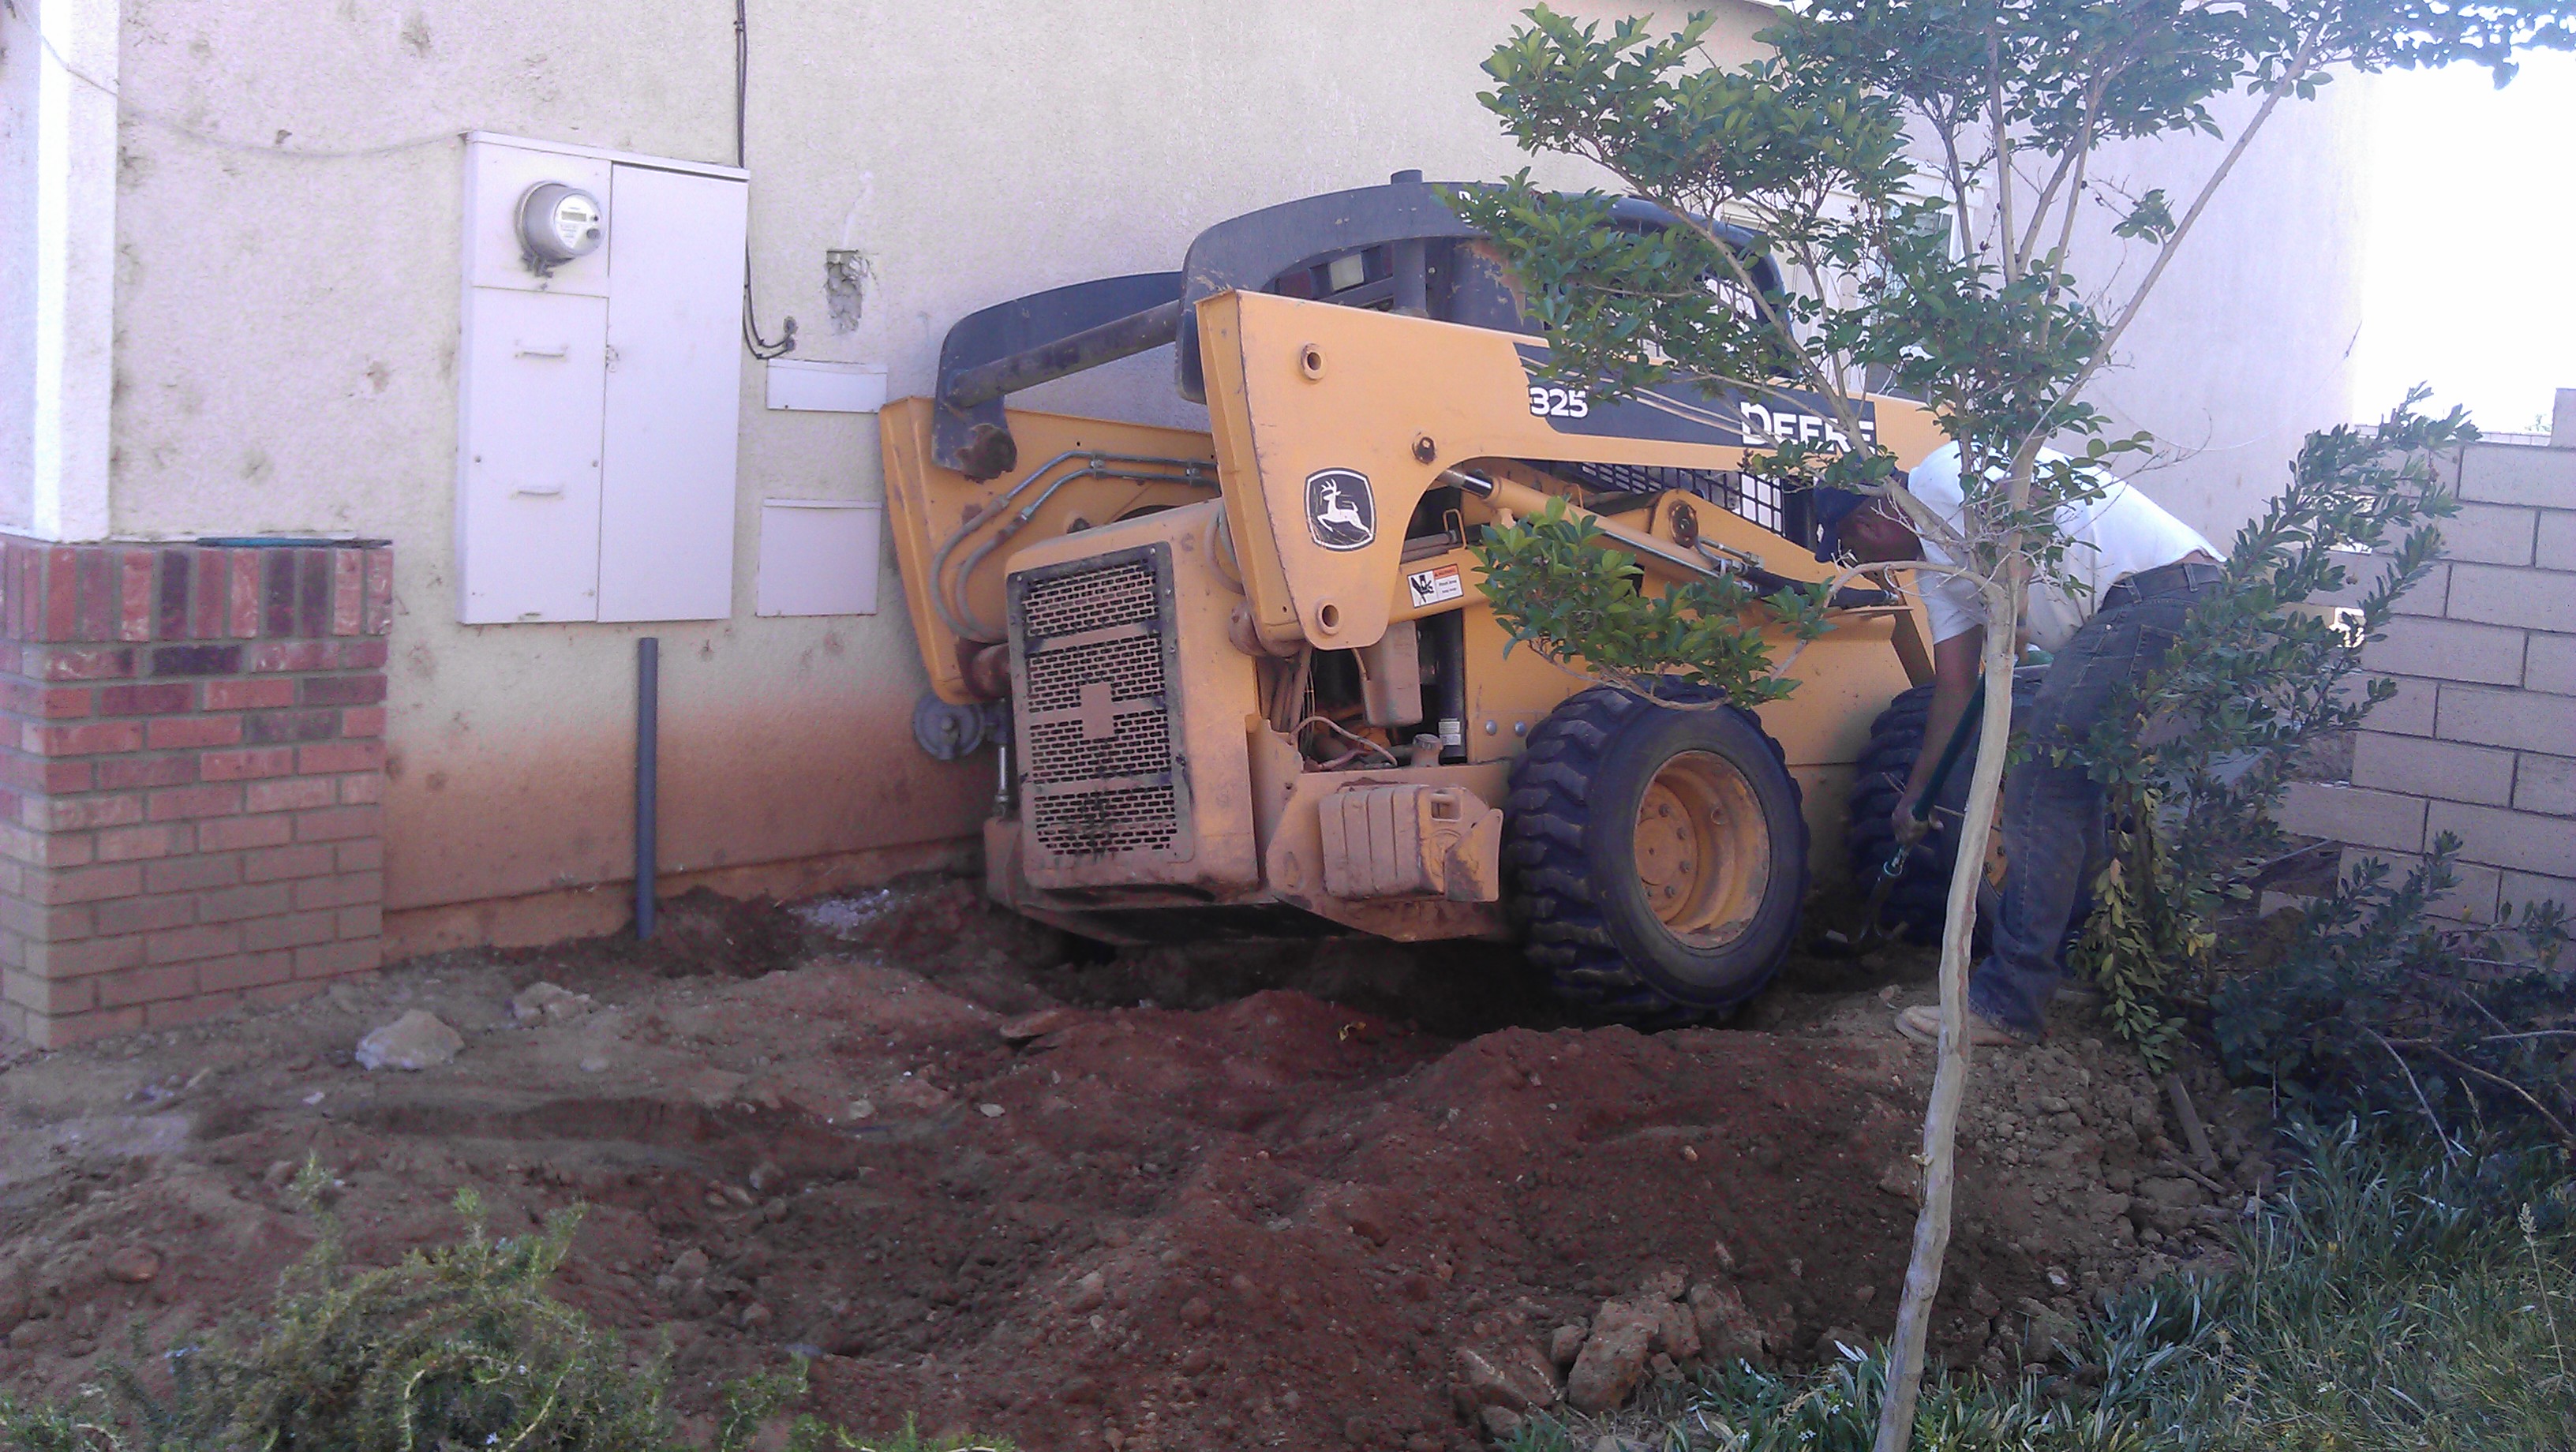 Humberto Garcia of Oasis Custom Pools runs the tractor into my house.breaking open the stucco